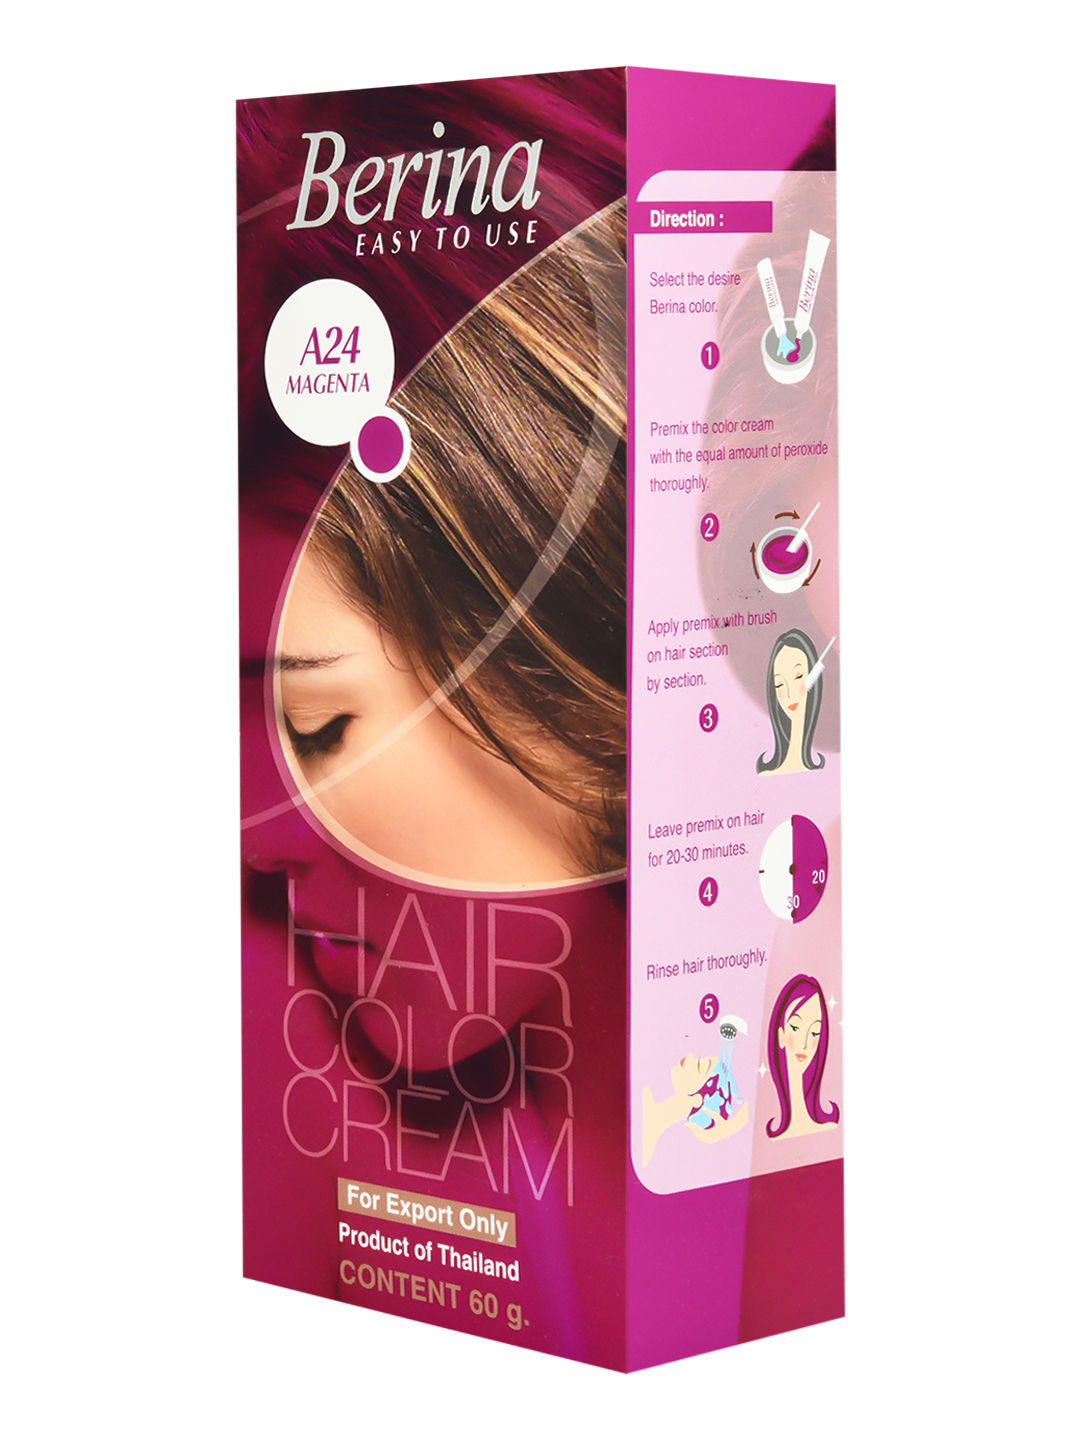 How To Get Magenta Hair Color Using LOreal Hicolor   Using LOreal  HiColor Magenta by Joanne Le colourwarehouse ukbeautymarketplace  haircolours loreal wwwcolourwarehousecom  By Colourwarehouse  Facebook